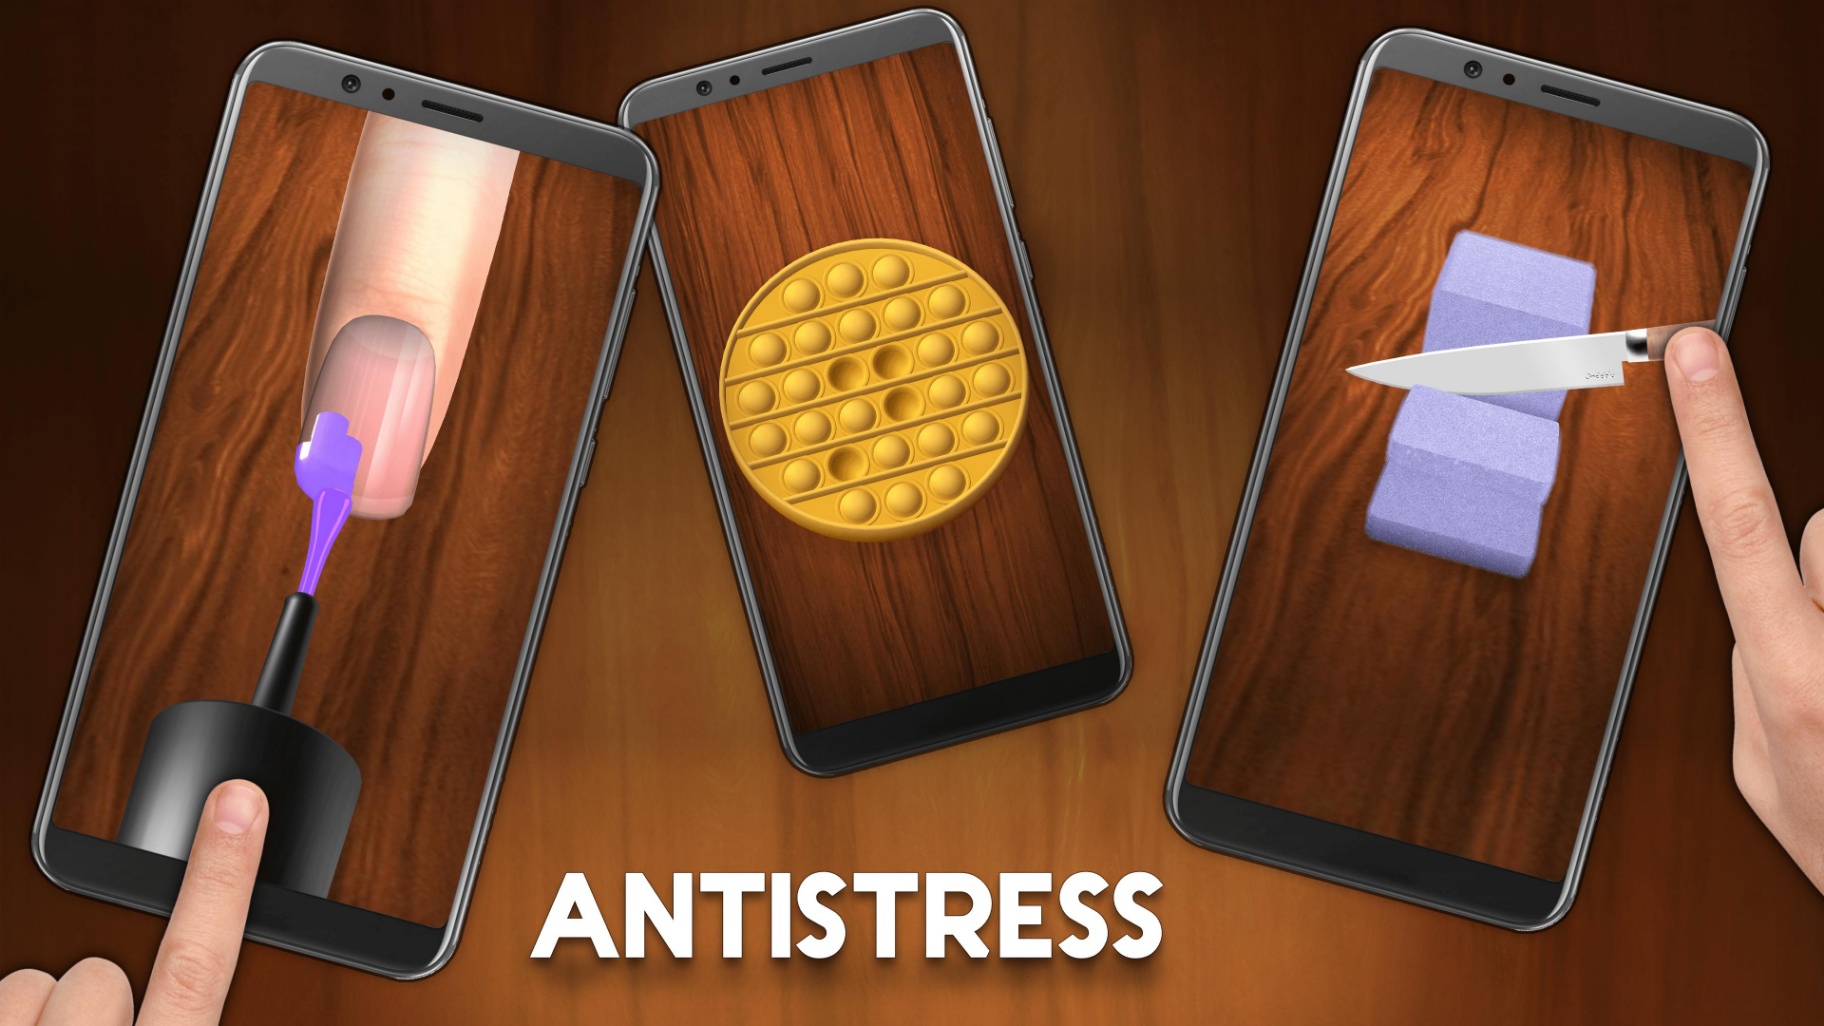 Antistress - How to Get Coins